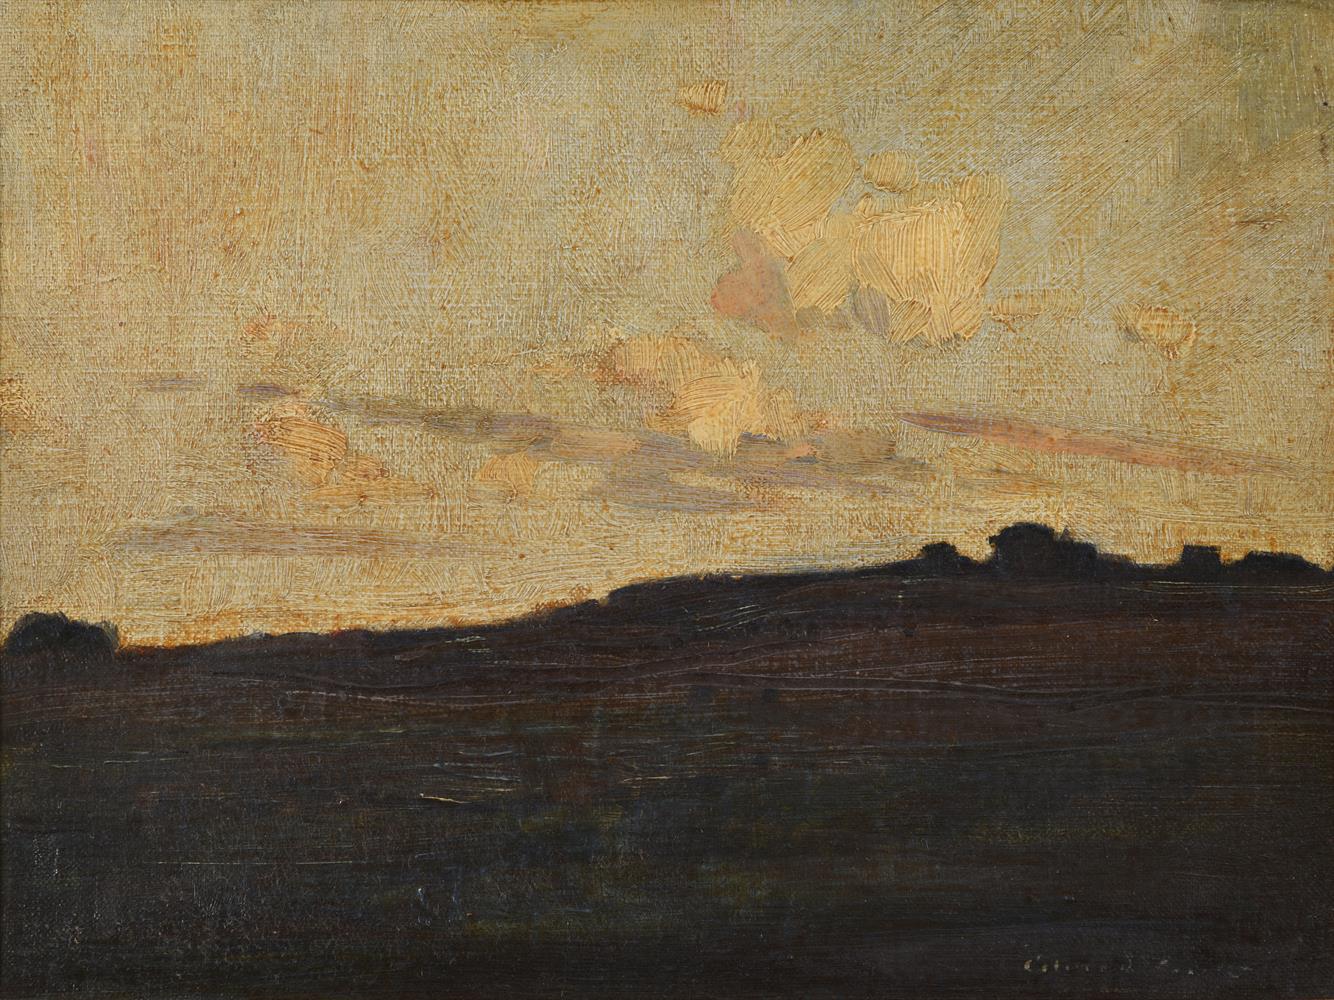 SIR ALFRED EAST (BRITISH 1849-1913), A VIEW OF A LOW RIDGE - Image 2 of 3